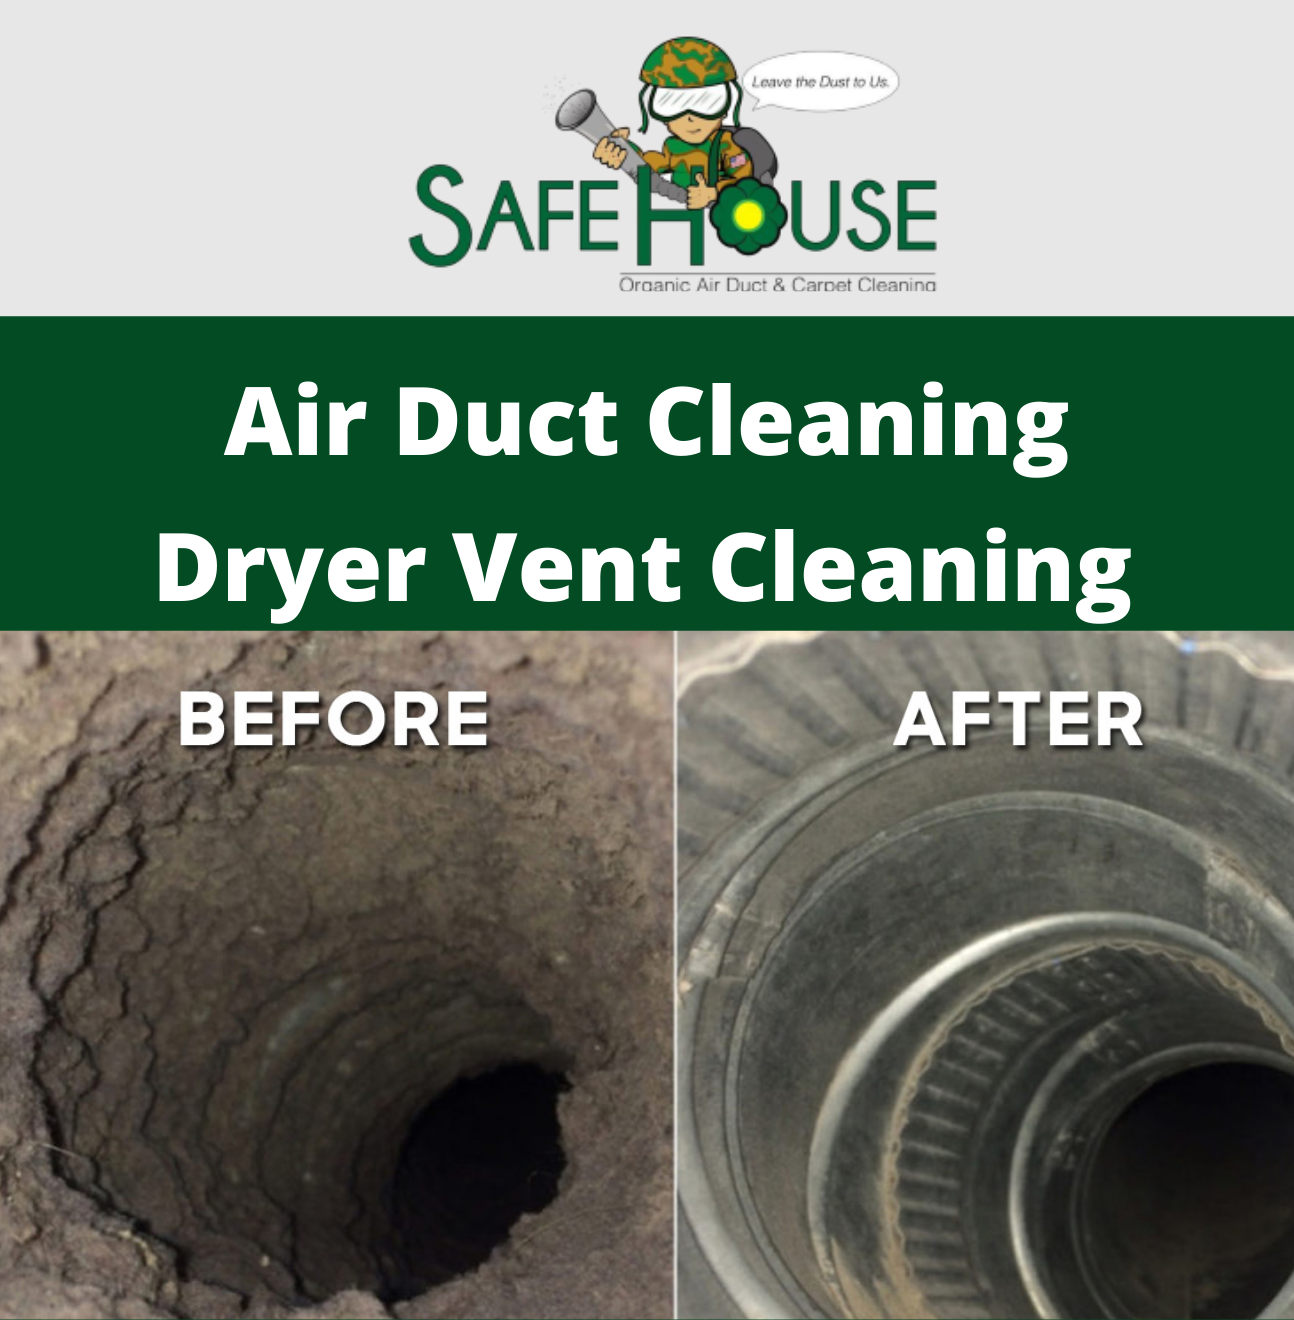 Air Duct cleaning dryer vent cleaning